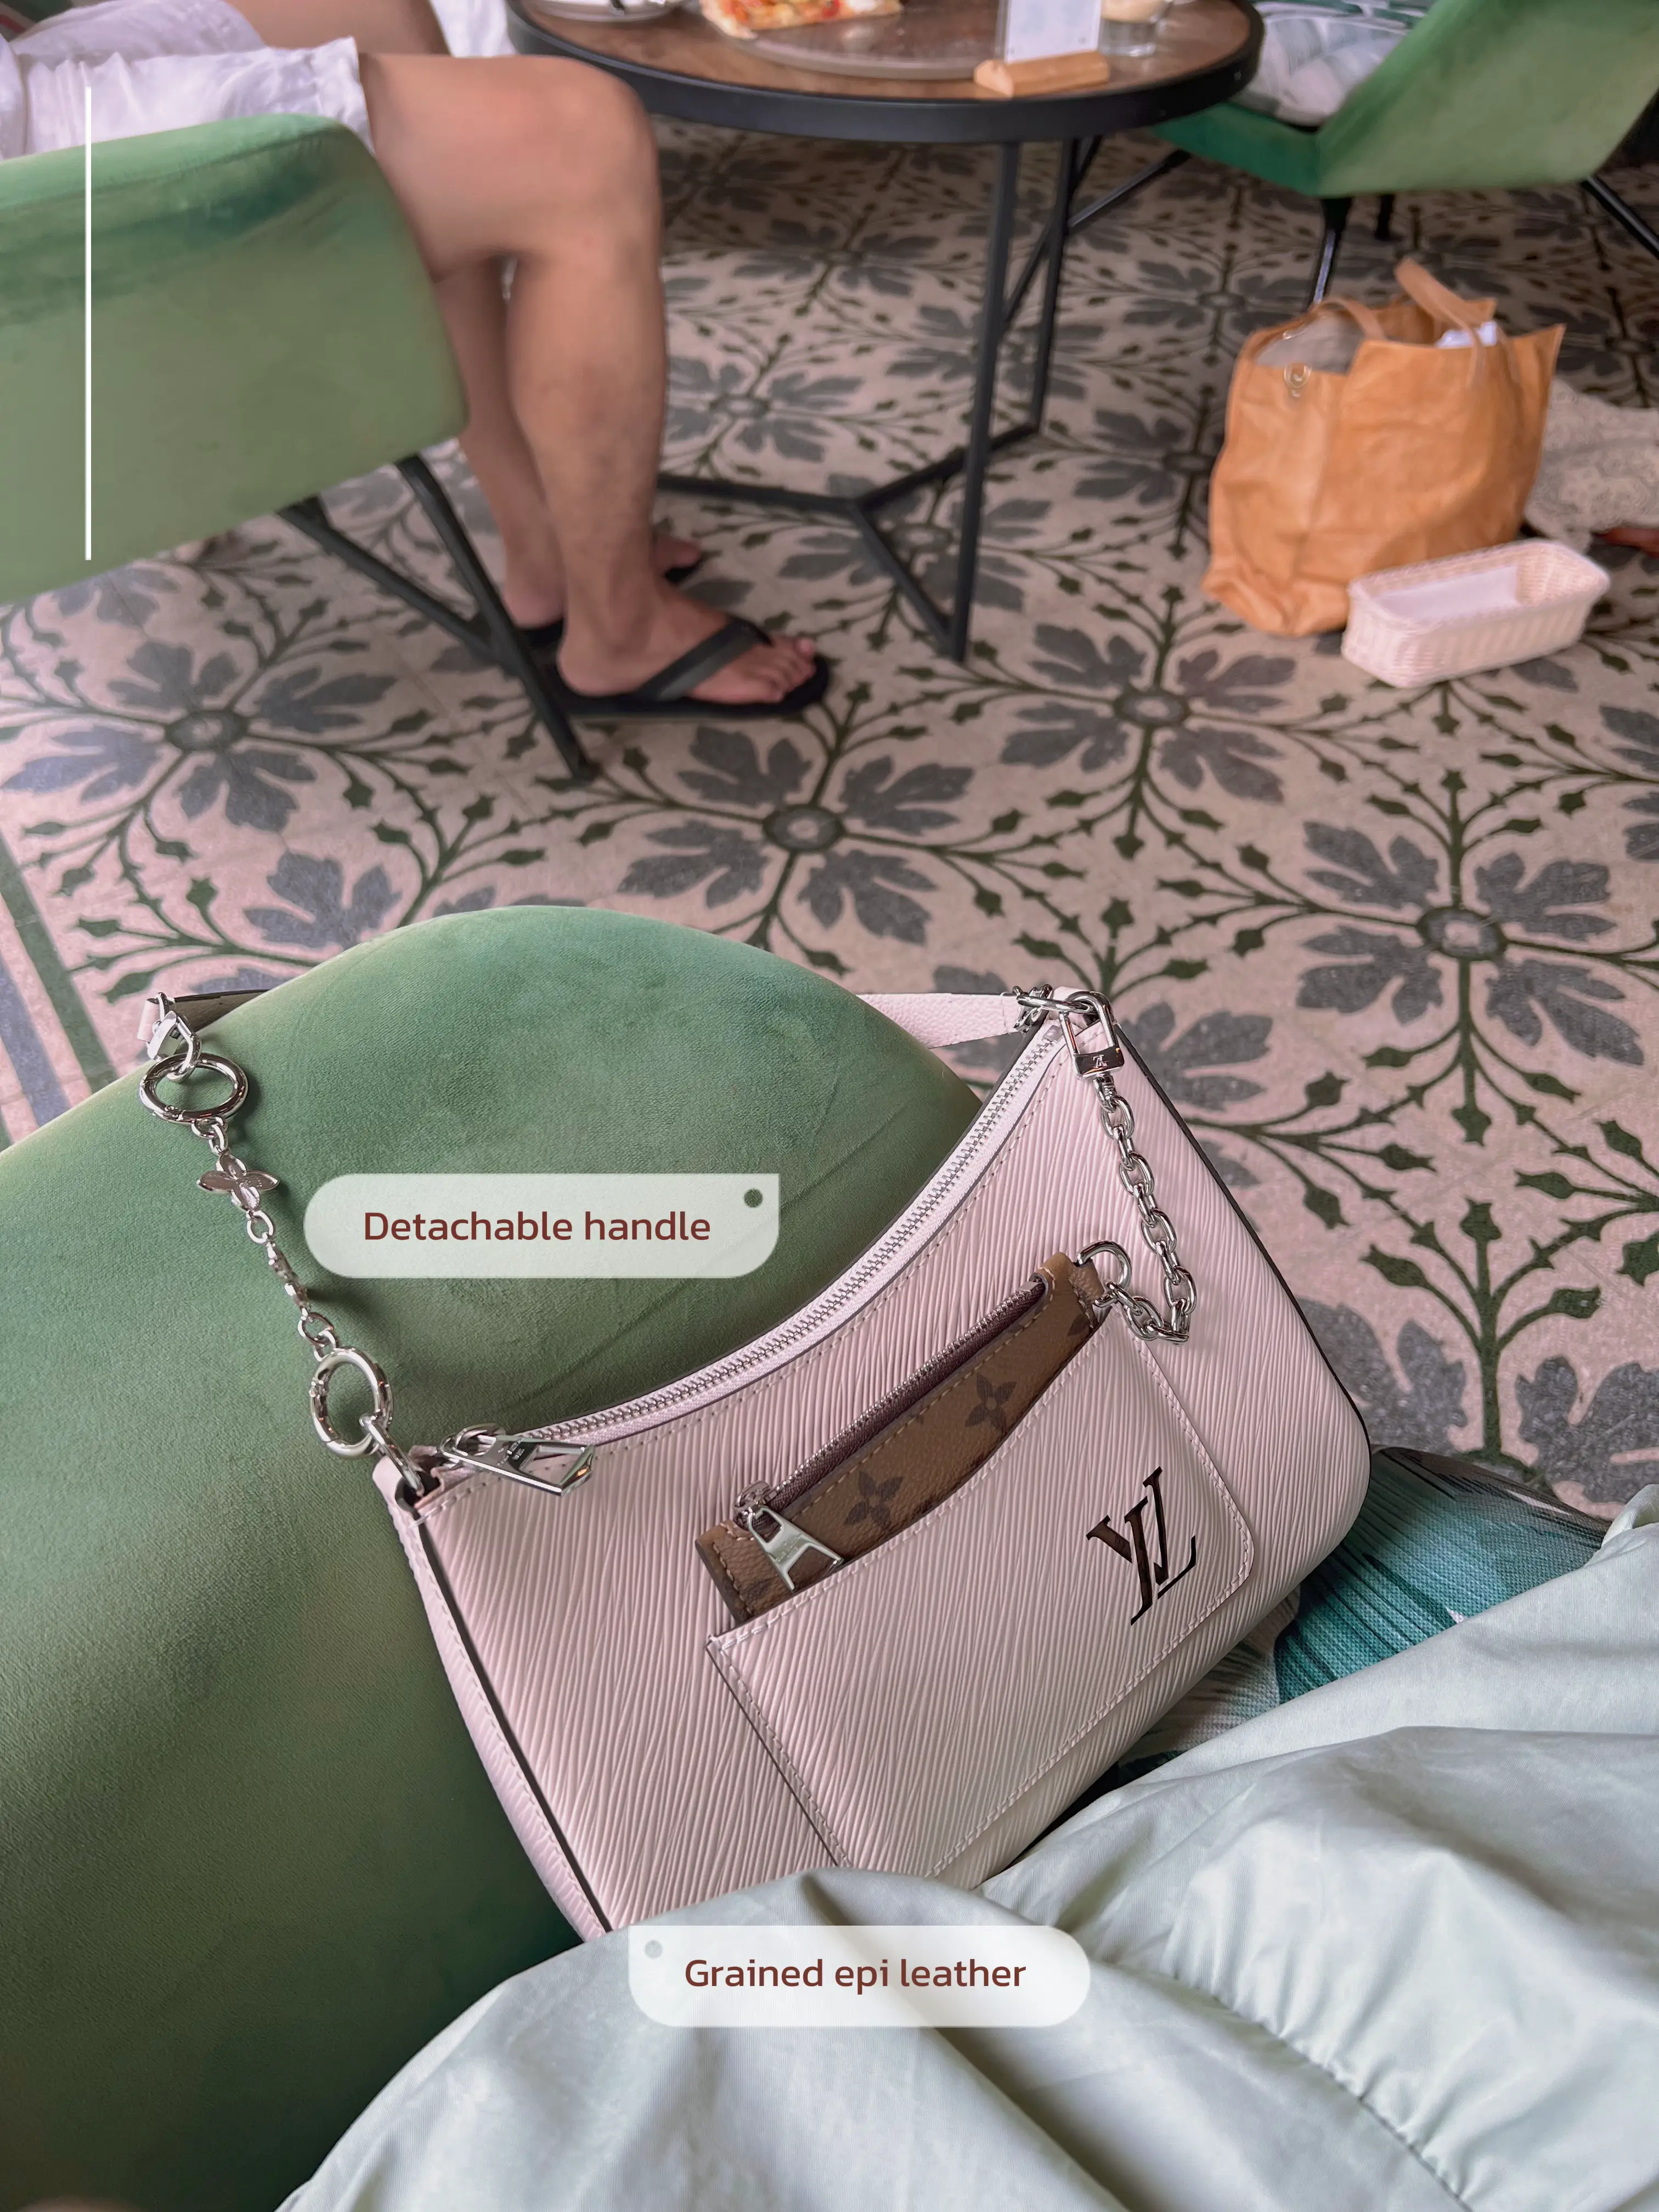 Reviews on the lv marelle bag🙌🏻, Gallery posted by Tan Simyi